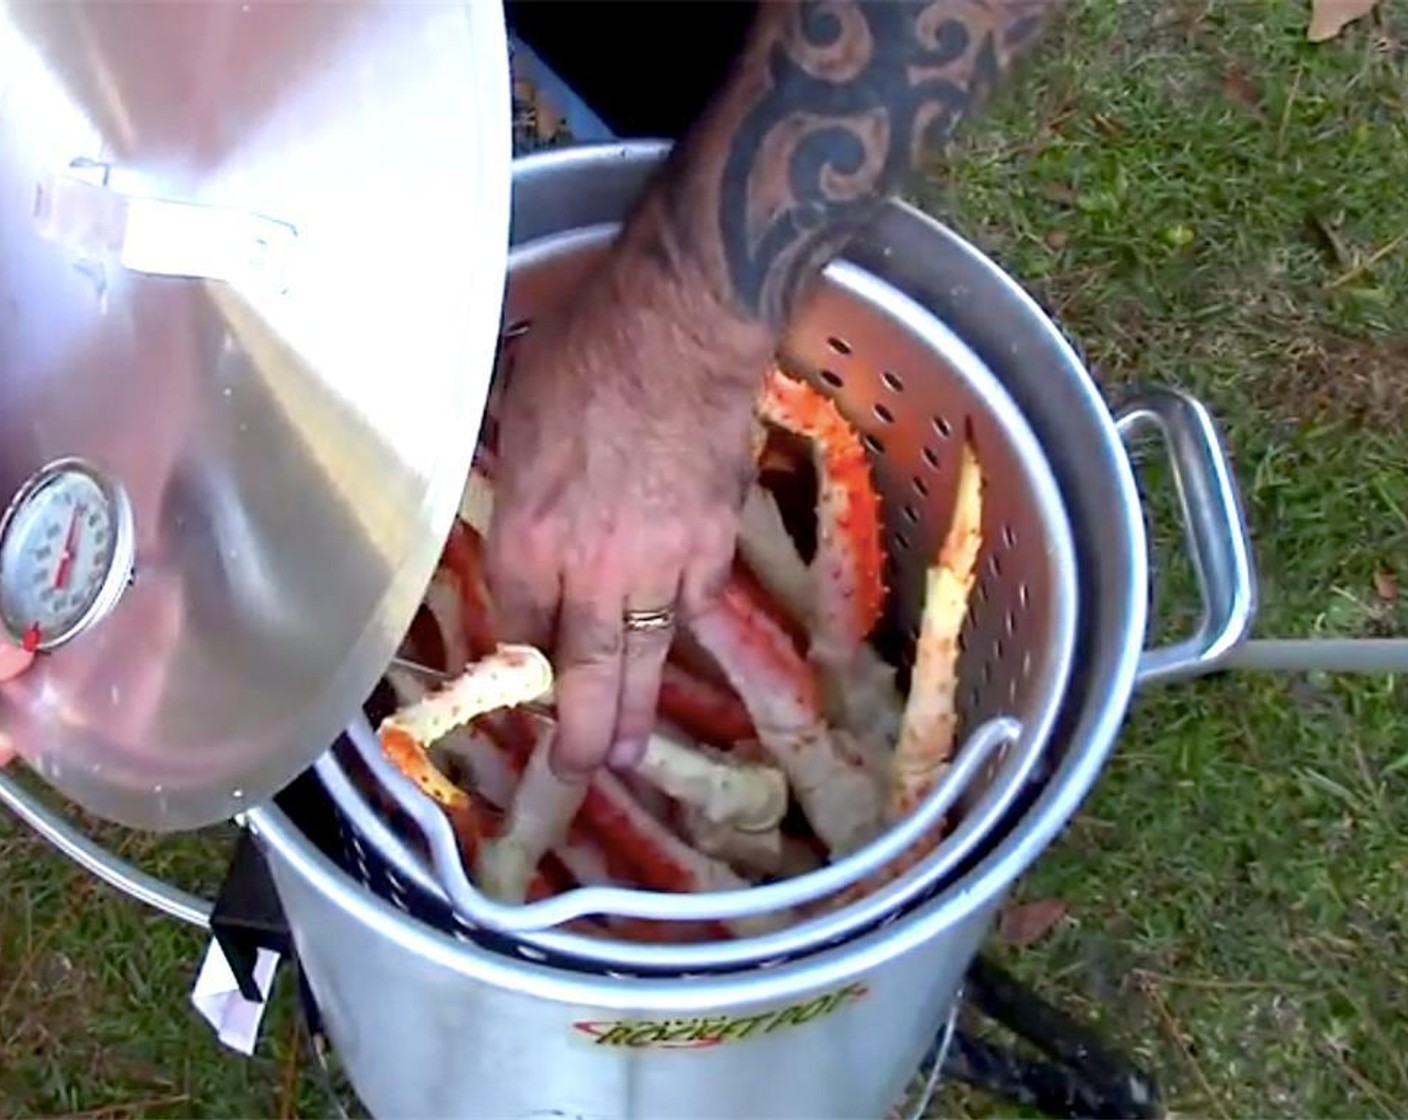 step 9 Stab one of the crab legs with a thermometer. Bring the cold pot to a boil to steam the crabs and stop steaming when it reaches 145 degrees F (60 degrees C).